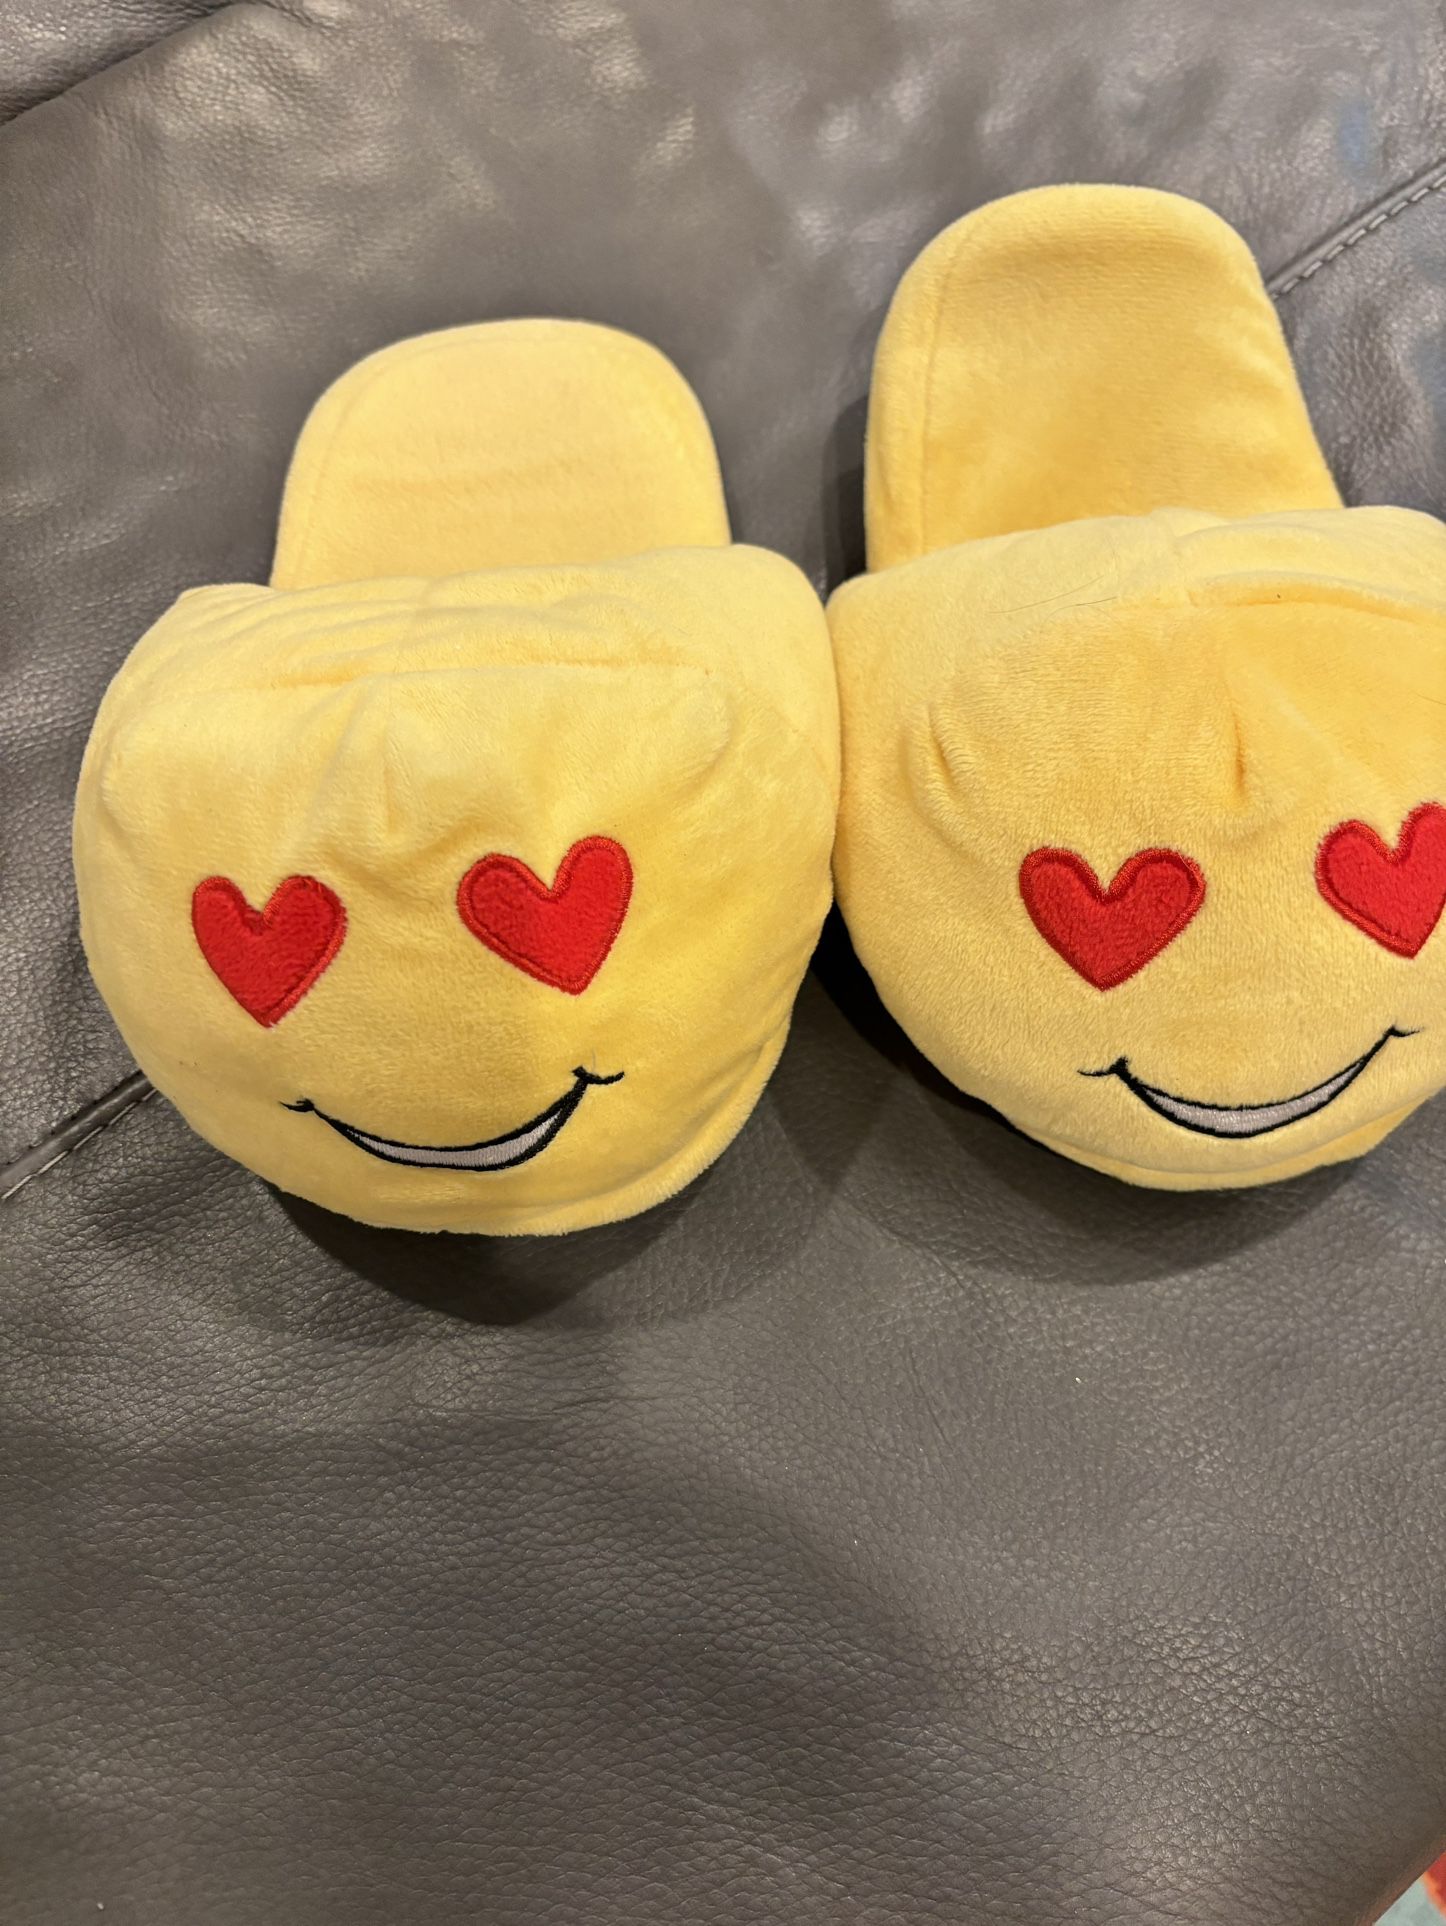 Cute Women’s Emoji Slippers Size 7-8. Excellent condition. Venmo to hold located in Murray